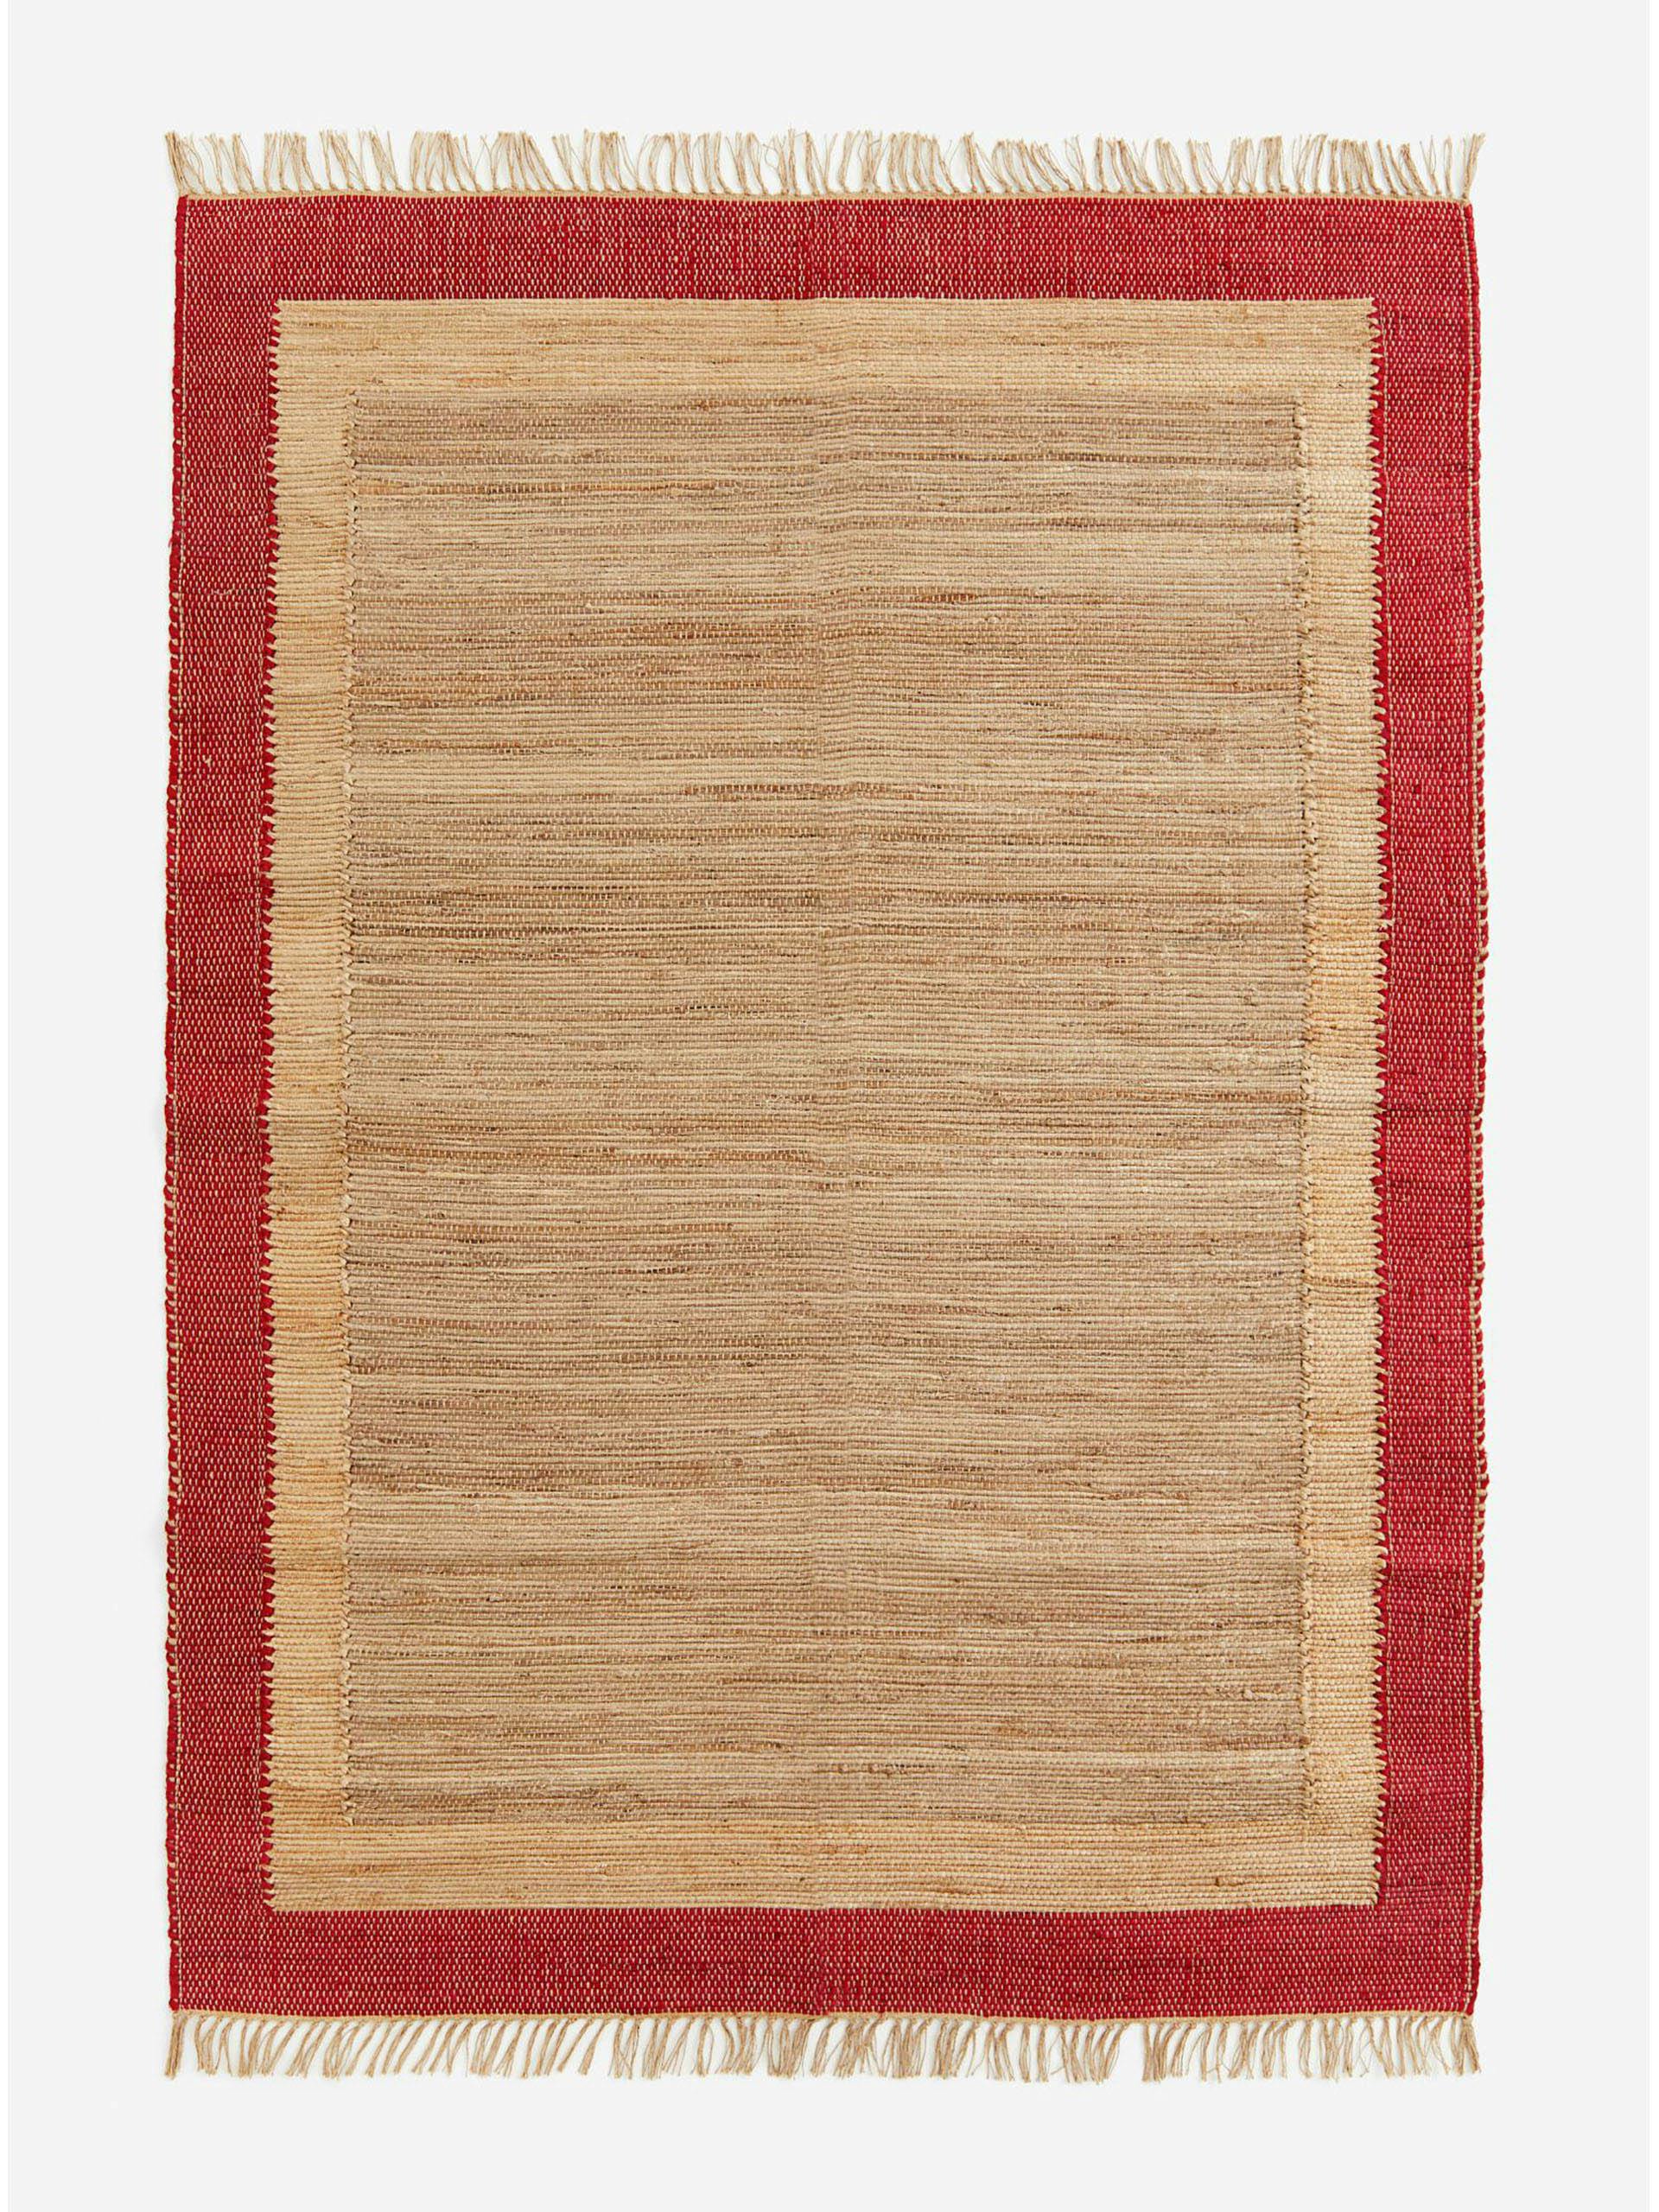 Beige and red jute rug